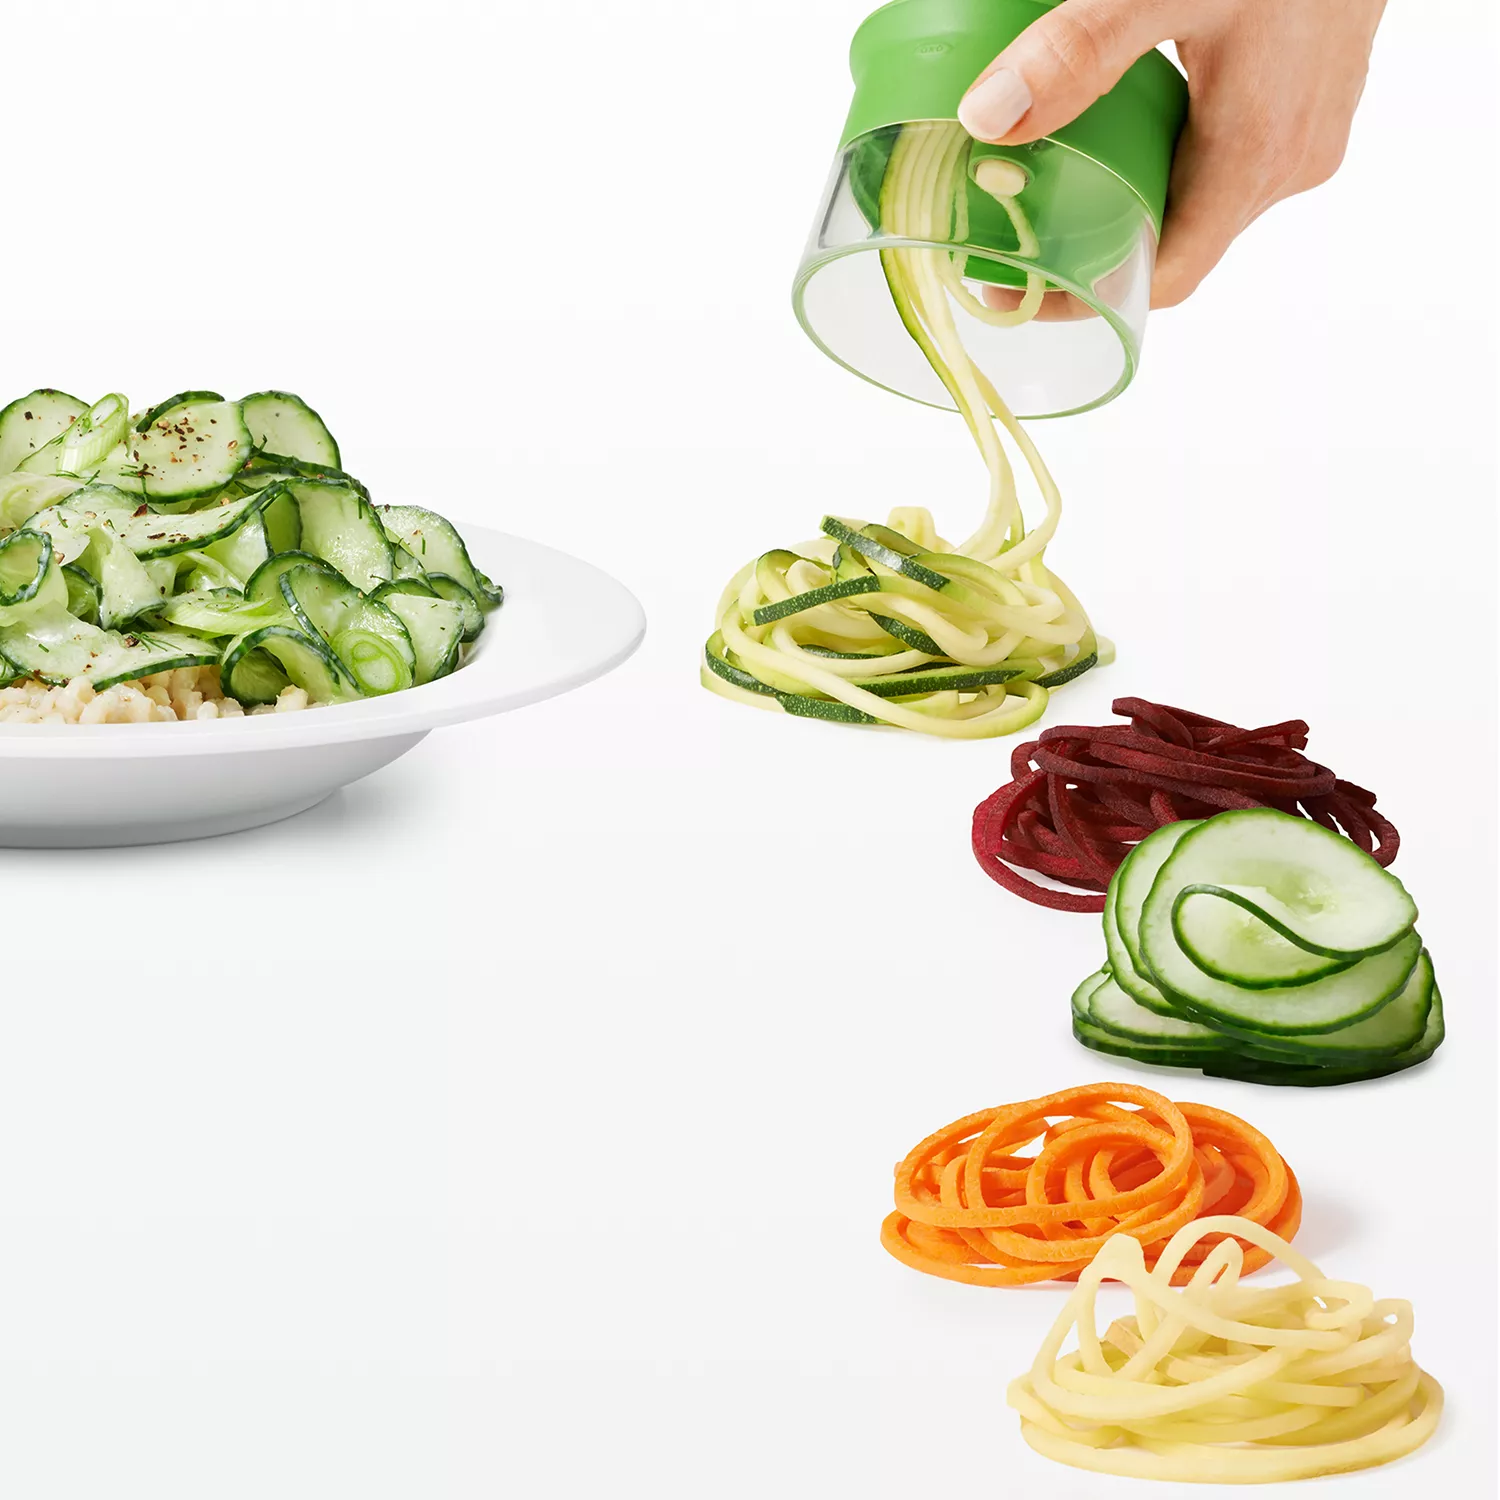 OXO OXO Tabletop Spiralizer with 3 blades - Whisk